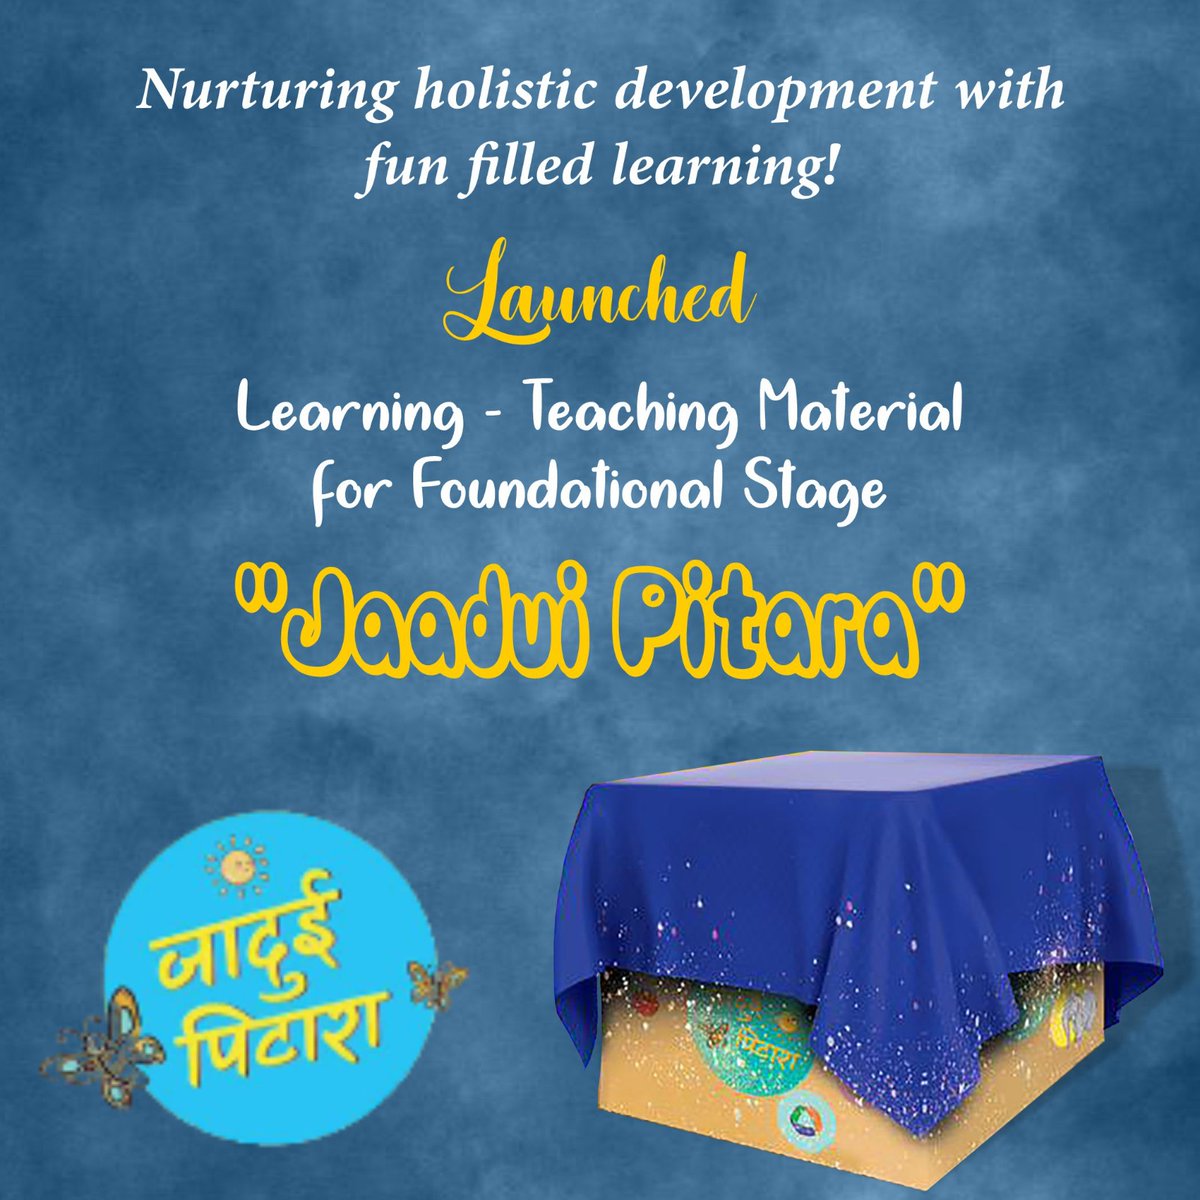 Supporting all round development of children through fun-filled learning! A unique Learning-Teaching material (#JaaduiPitara) for the Foundational Stage has been launched for holistic development of learners aged 3 to 8 years, as per the major recommendations of the #NEP2020.